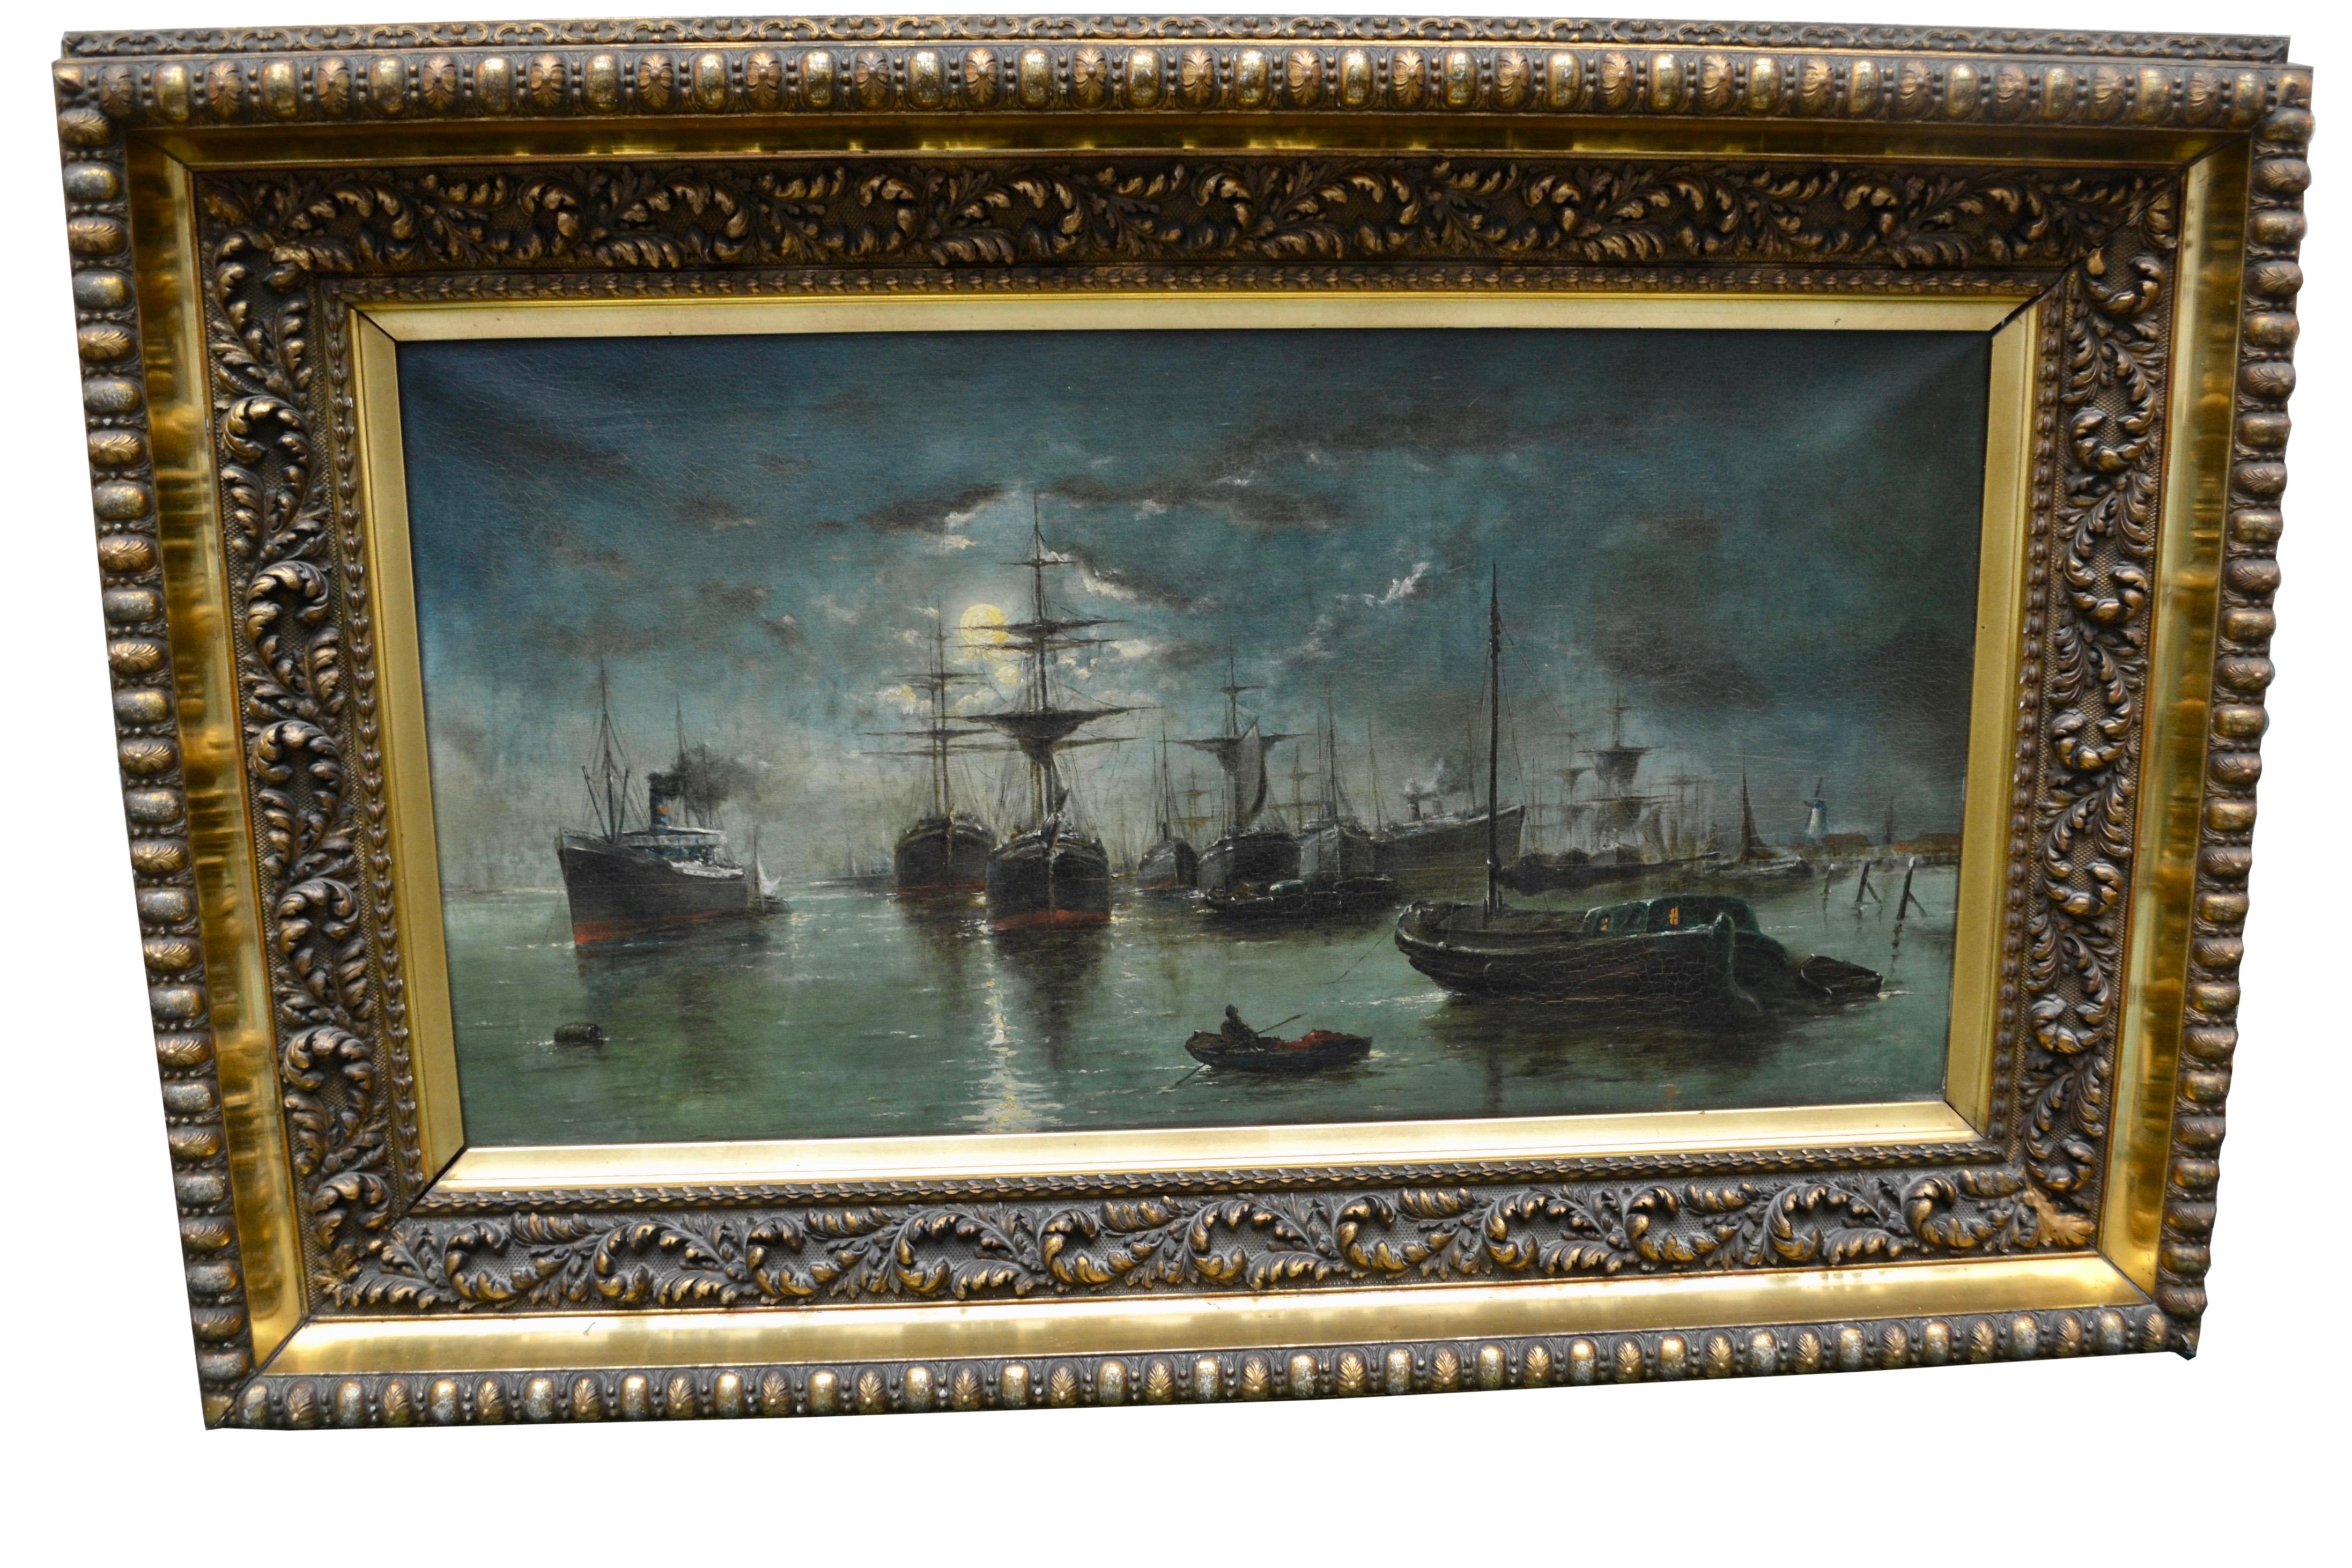 A beautifully executed early 20th Century oil on canvas marine painting. Signed Charles Langenbeck ( 1873-1943) dated 1906  and presented in a robust carved giltwood frame. The painting shows a flotilla of boats, sailing ships and even a steam ship 